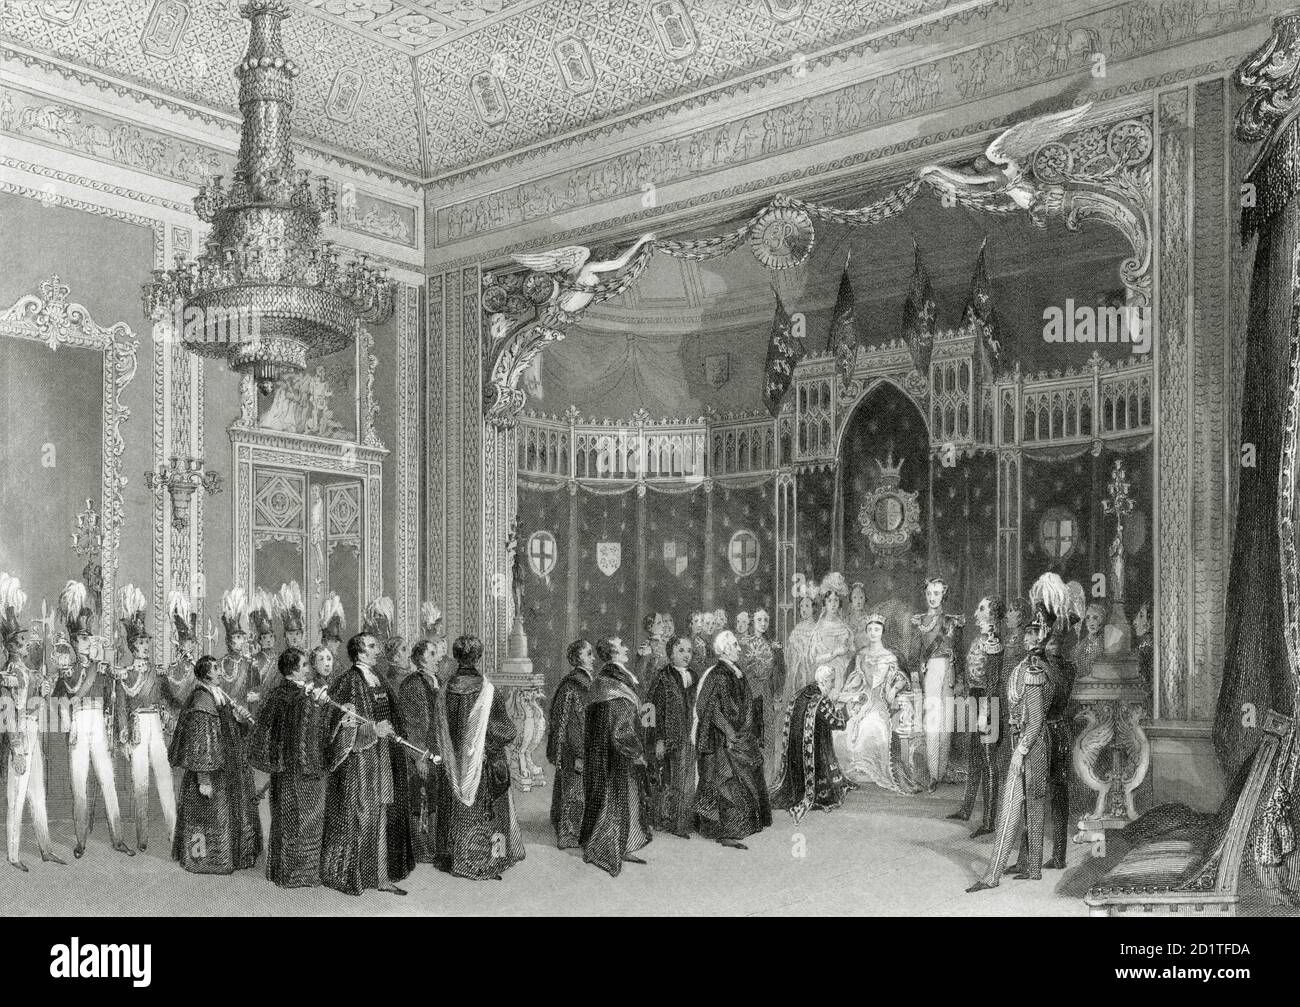 BUCKINGHAM PALACE, Buckingham Palace Road, City of Westminster, London. Interior of the Throne Room. Engraving dated 1840. From the Mayson Beeton Collection. Stock Photo